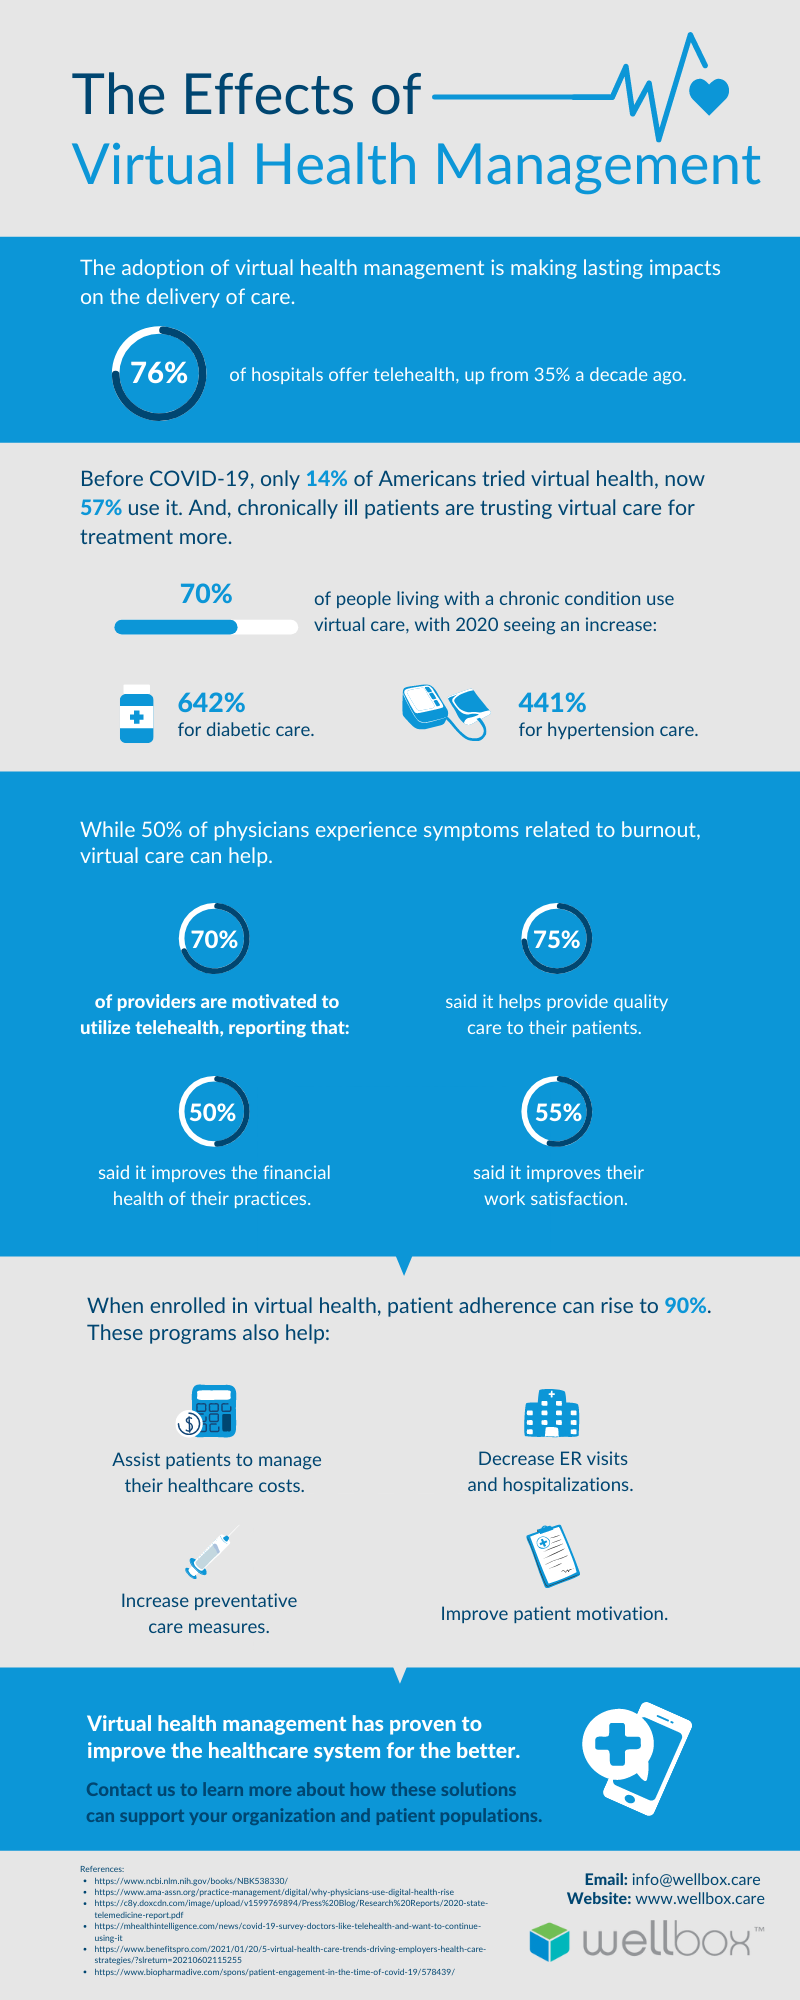 Discover a few positive effects virtual health management has had on the healthcare industry by checking out the infographic.